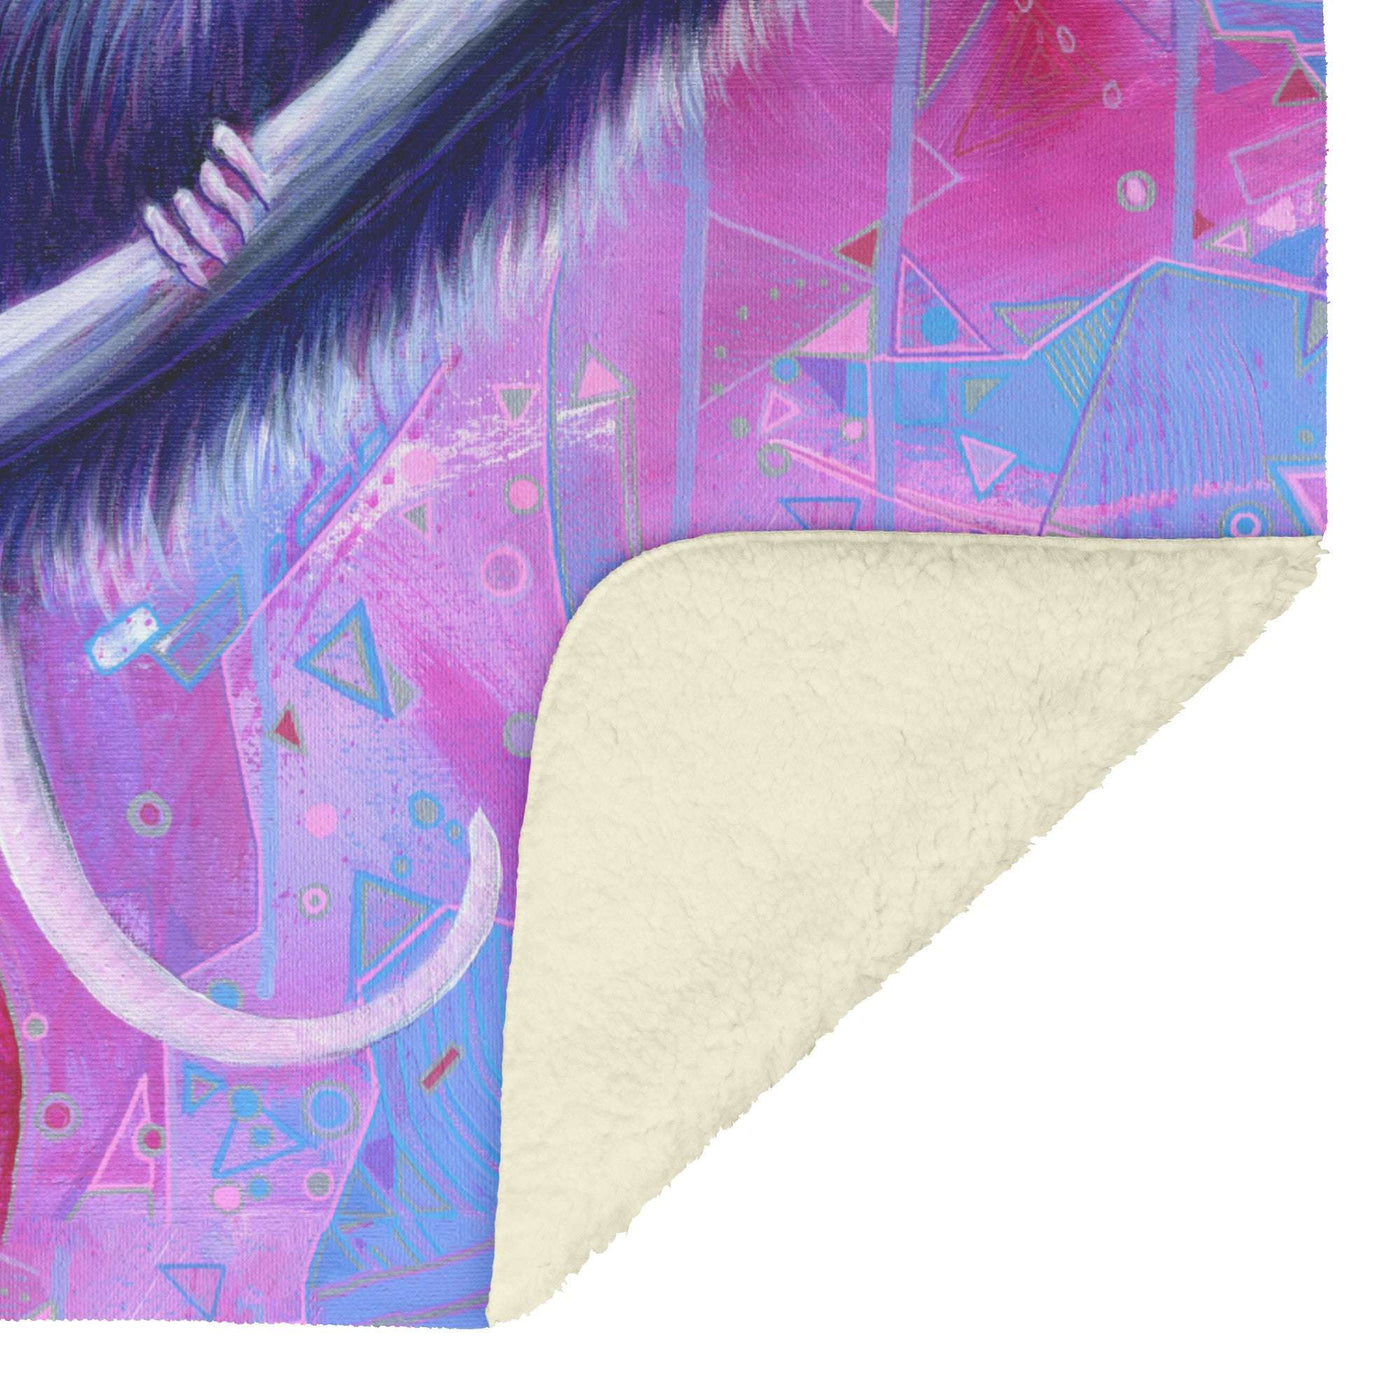 A close-up view of the folded fleece corner of the Opossum blanket, showcasing colorful abstract art featuring geometric shapes in pink and purple.